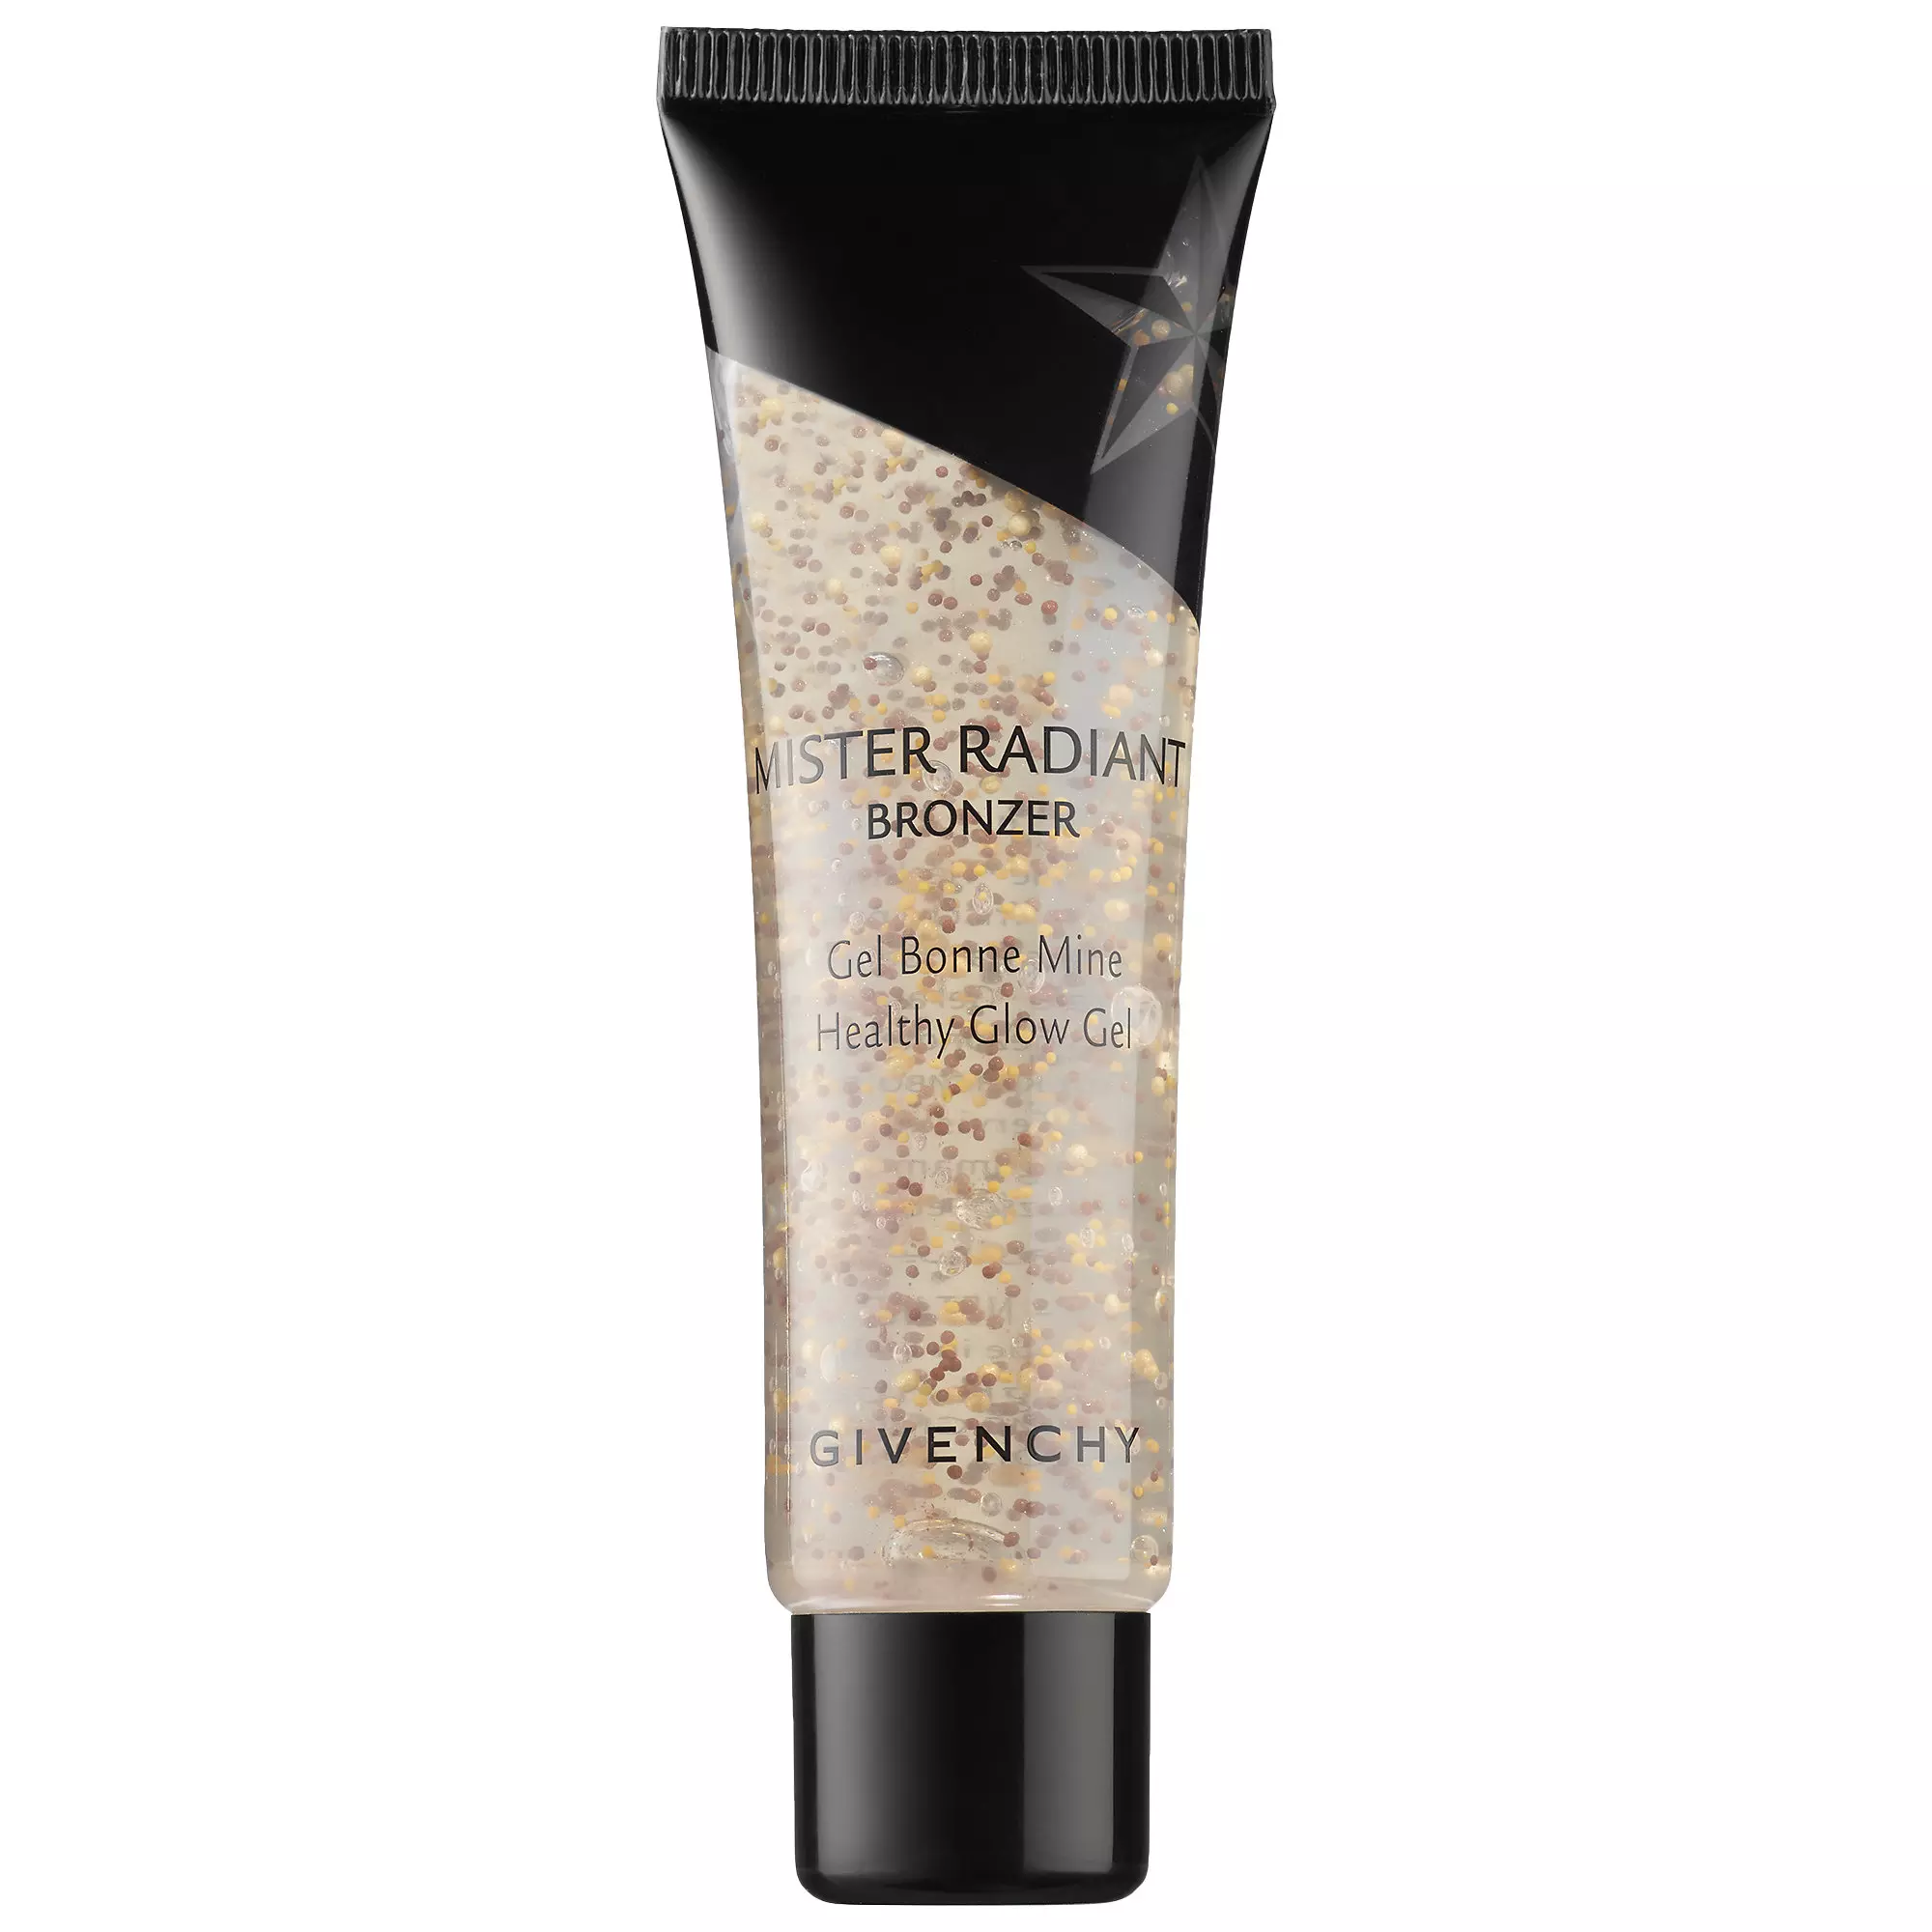 Givenchy Mister Radiant Bronzer Healthy Glow Gel  - Best deals  on Givenchy cosmetics